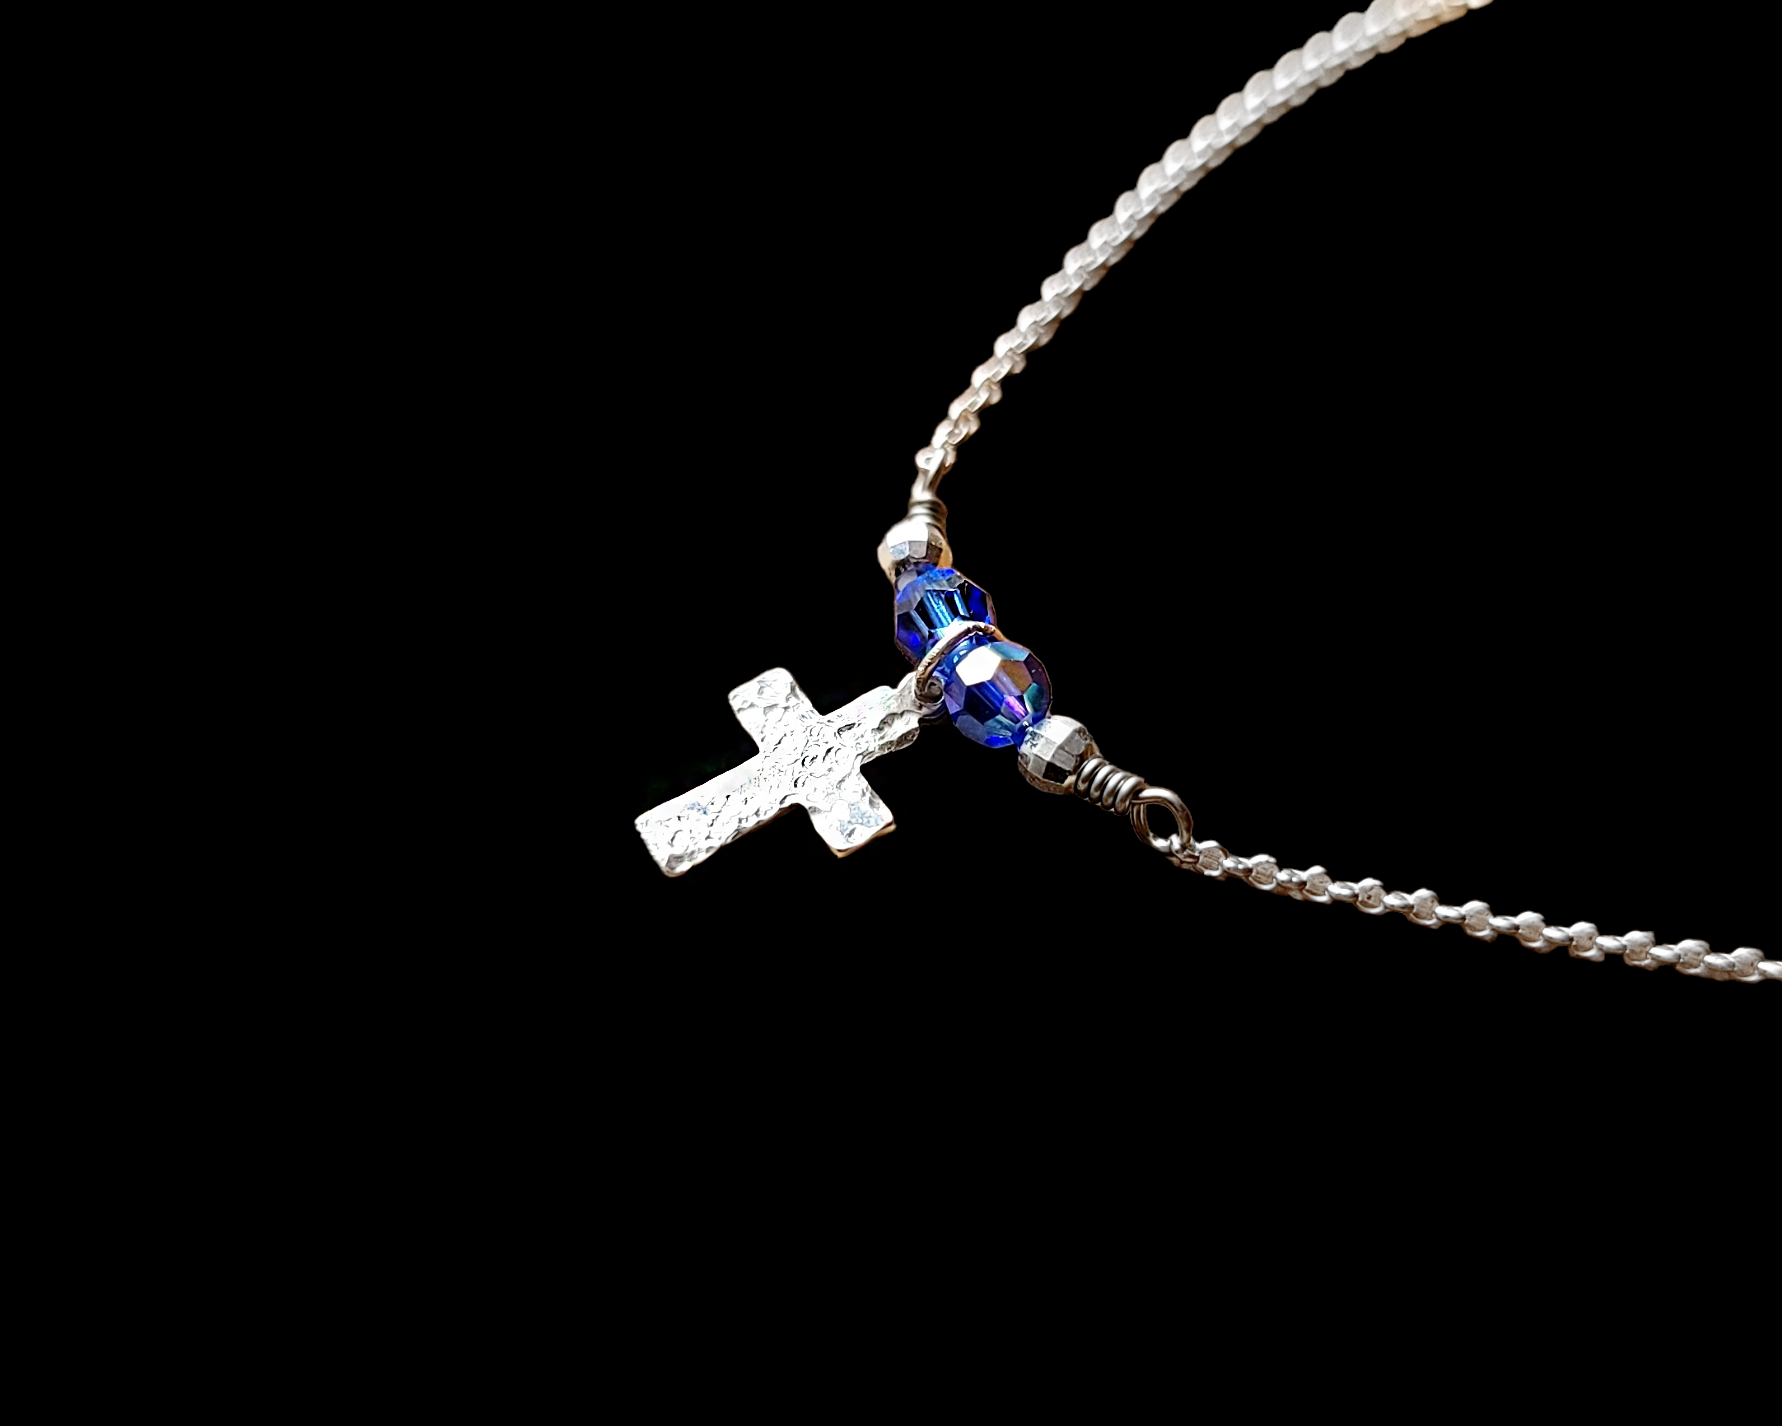 Sterling Silver Cross with small birthstone color crystals on either side, on a fine sterling silver fine Rolo Chain.